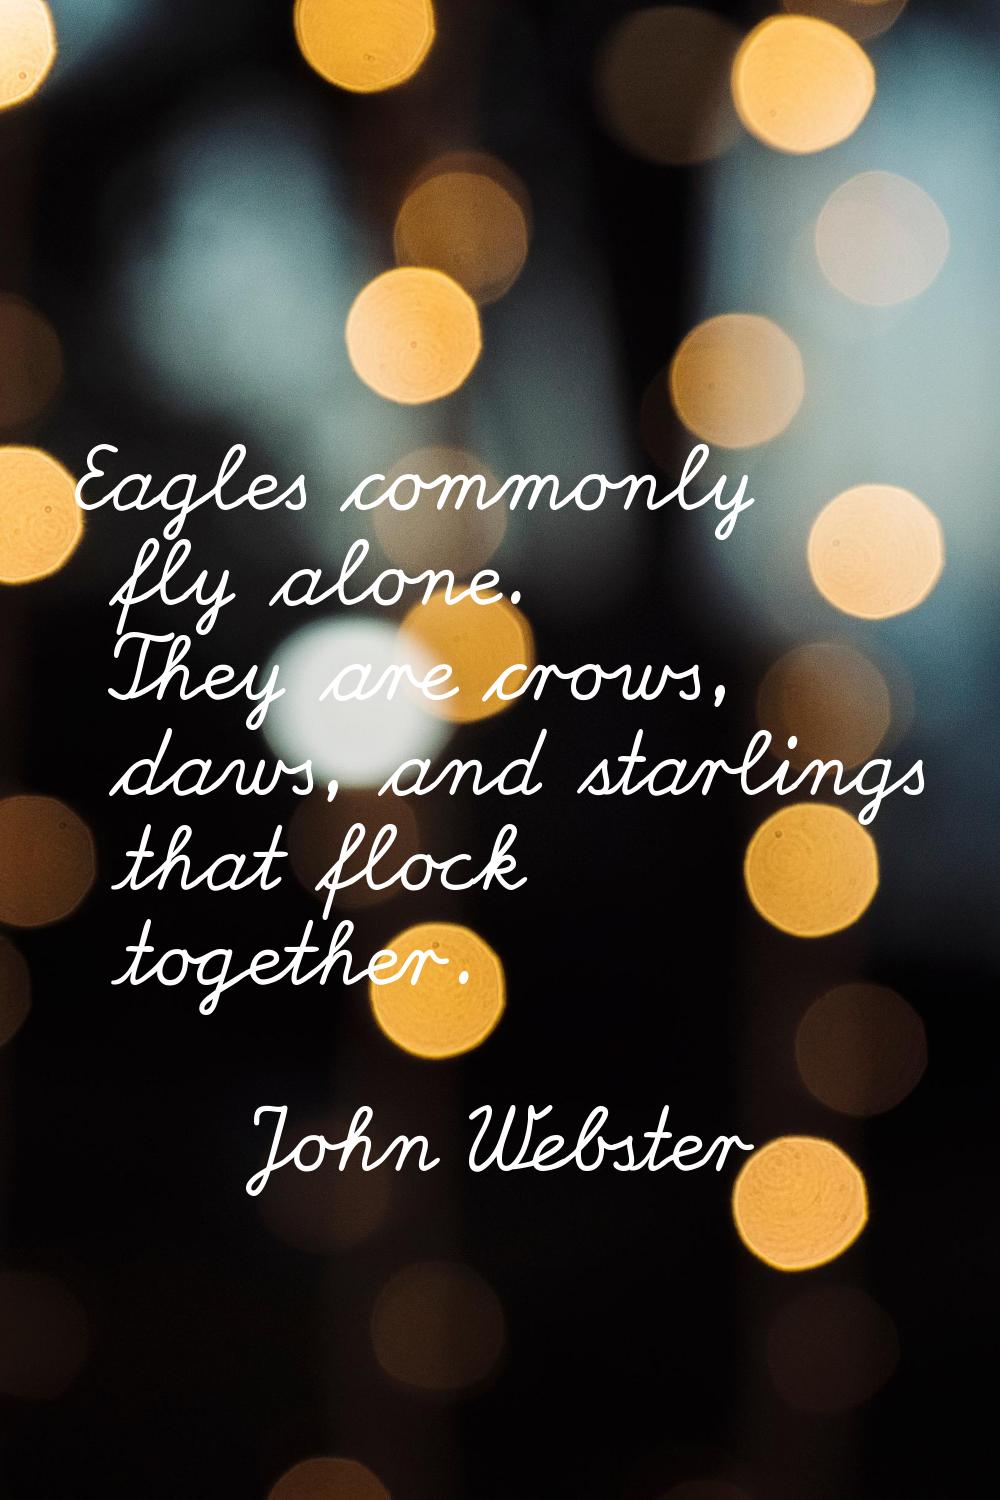 Eagles commonly fly alone. They are crows, daws, and starlings that flock together.